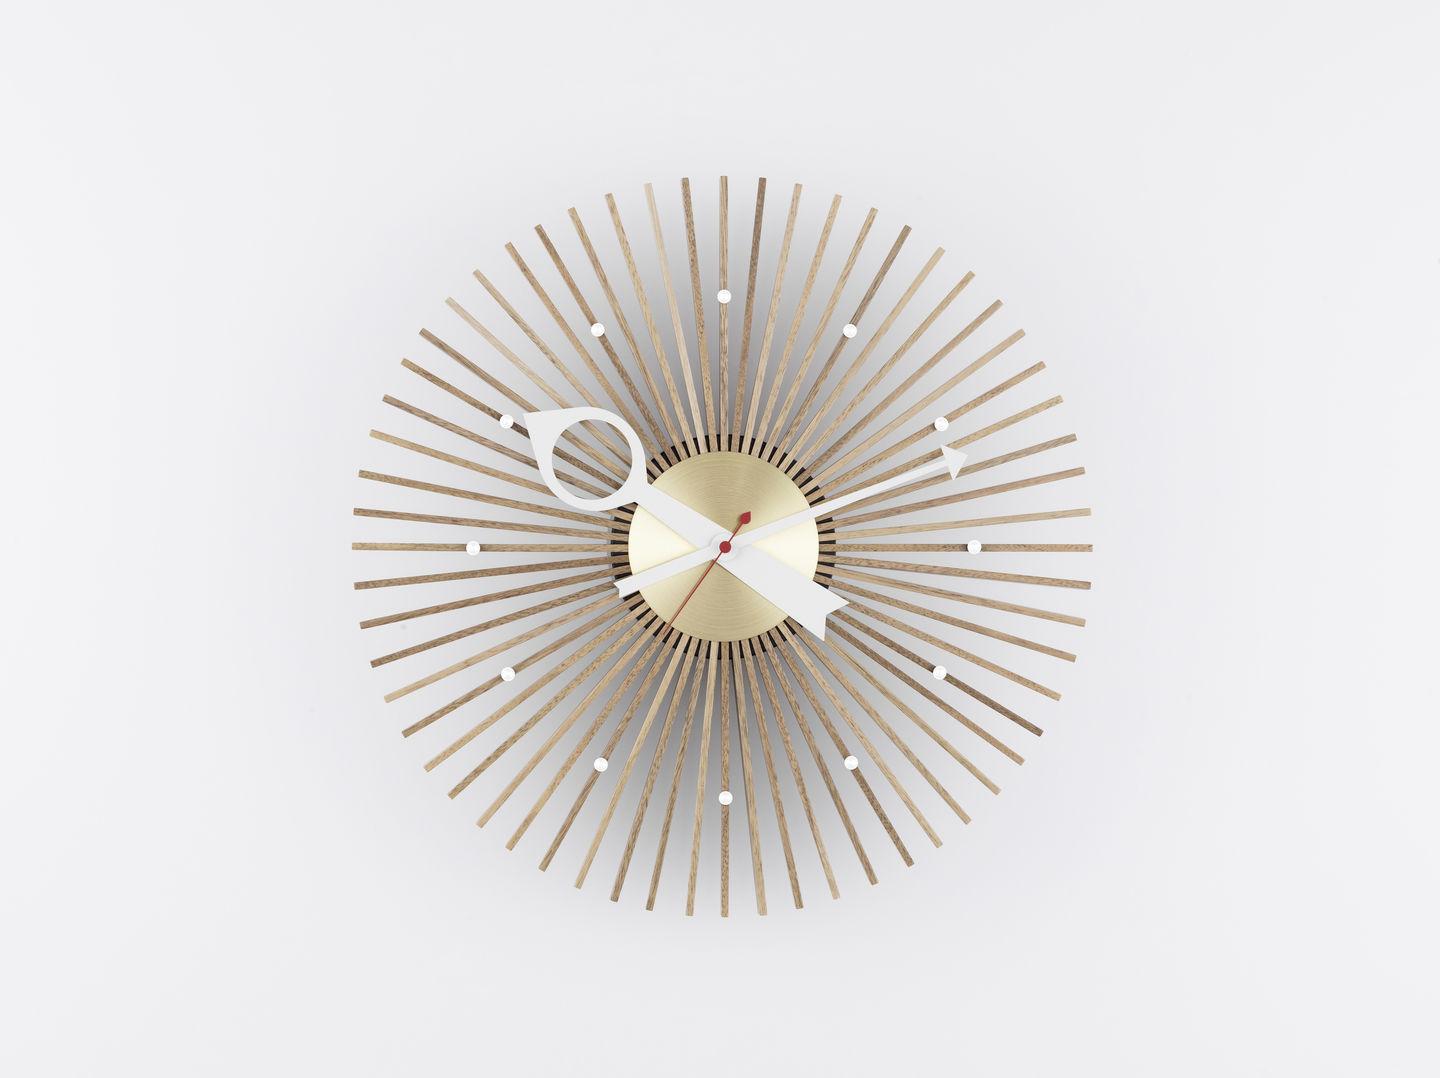 In 1947, the American designer George Nelson was commissioned to create a collection of clocks. Nelson analyzed how people used clocks and concluded that they read the time by discerning the relative position of the hands, which made the use of